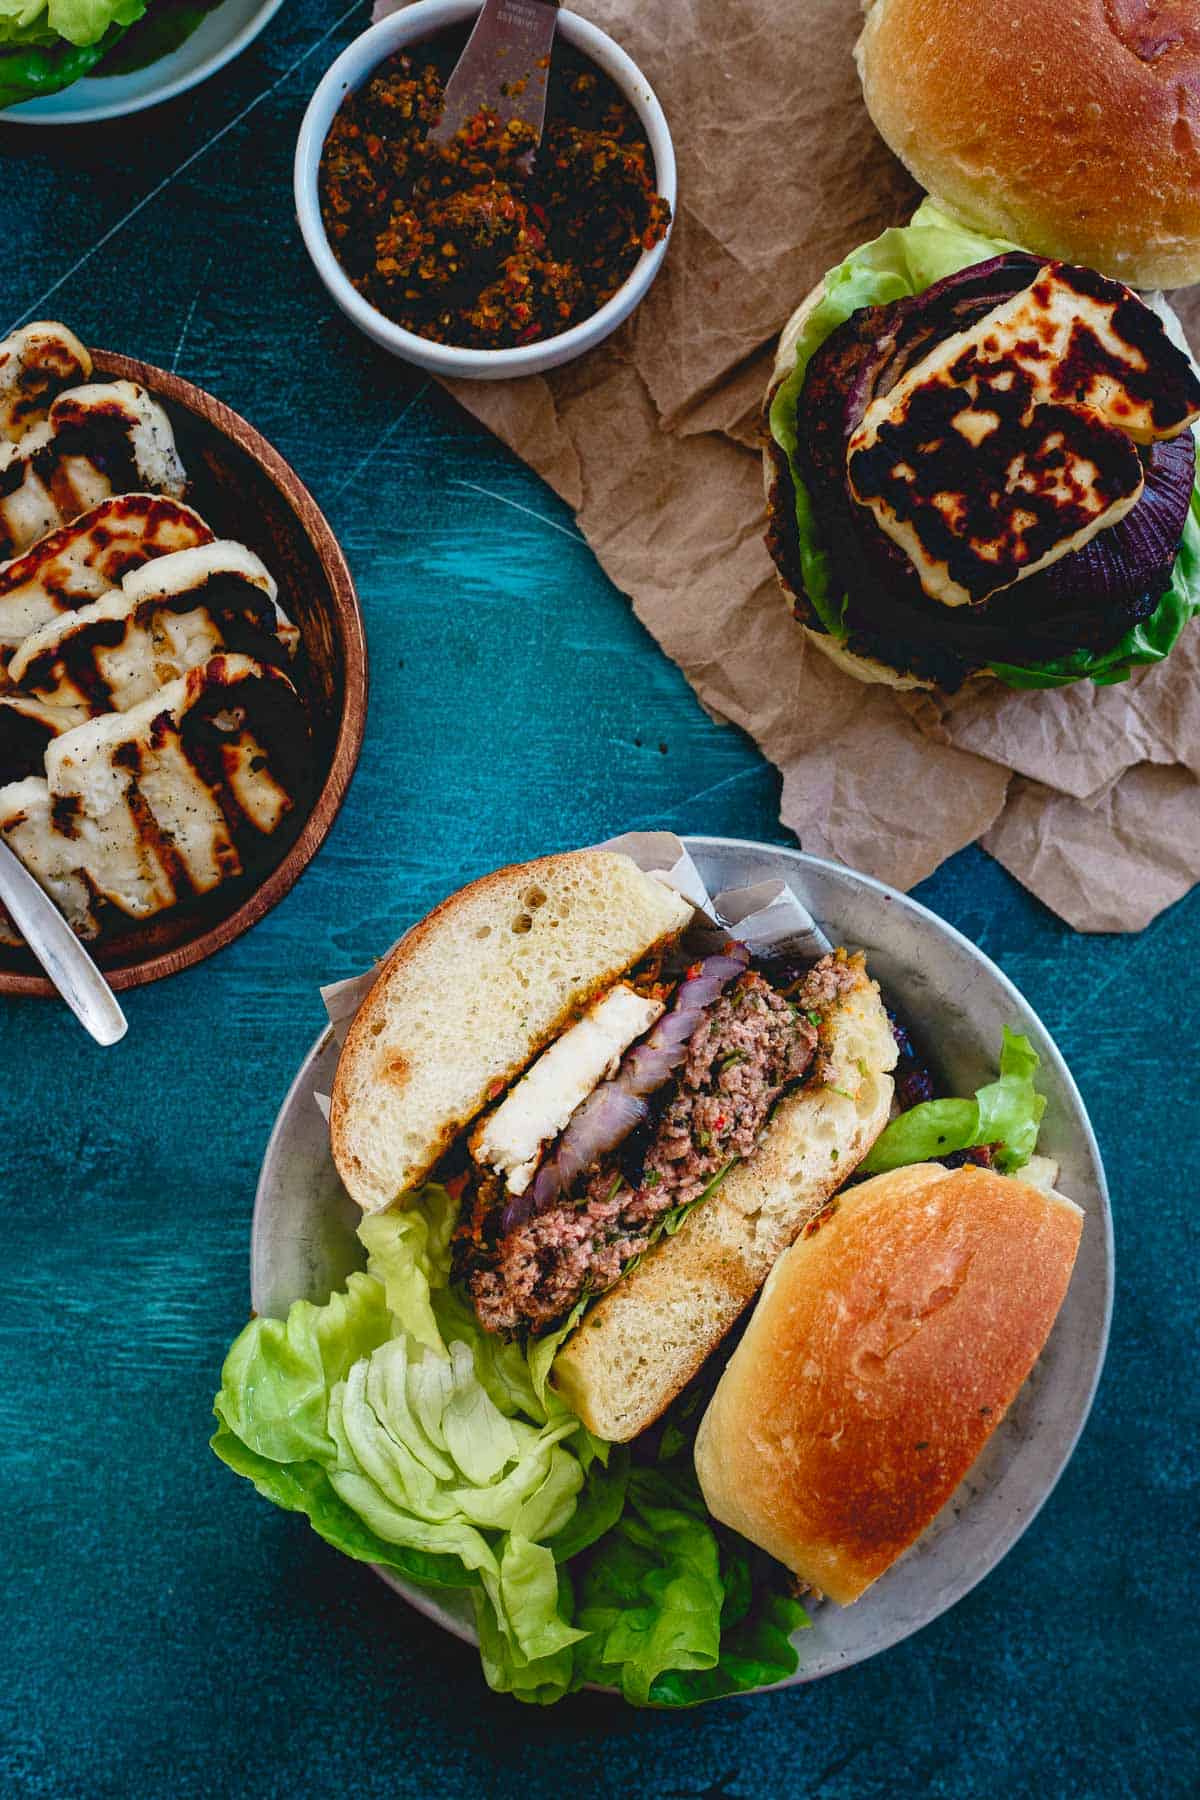 These lamb burgers are packed with fresh herbs, grilled red onions, a Mediterranean sun-dried tomato pesto spread for a nice change of pace to your summer burger.